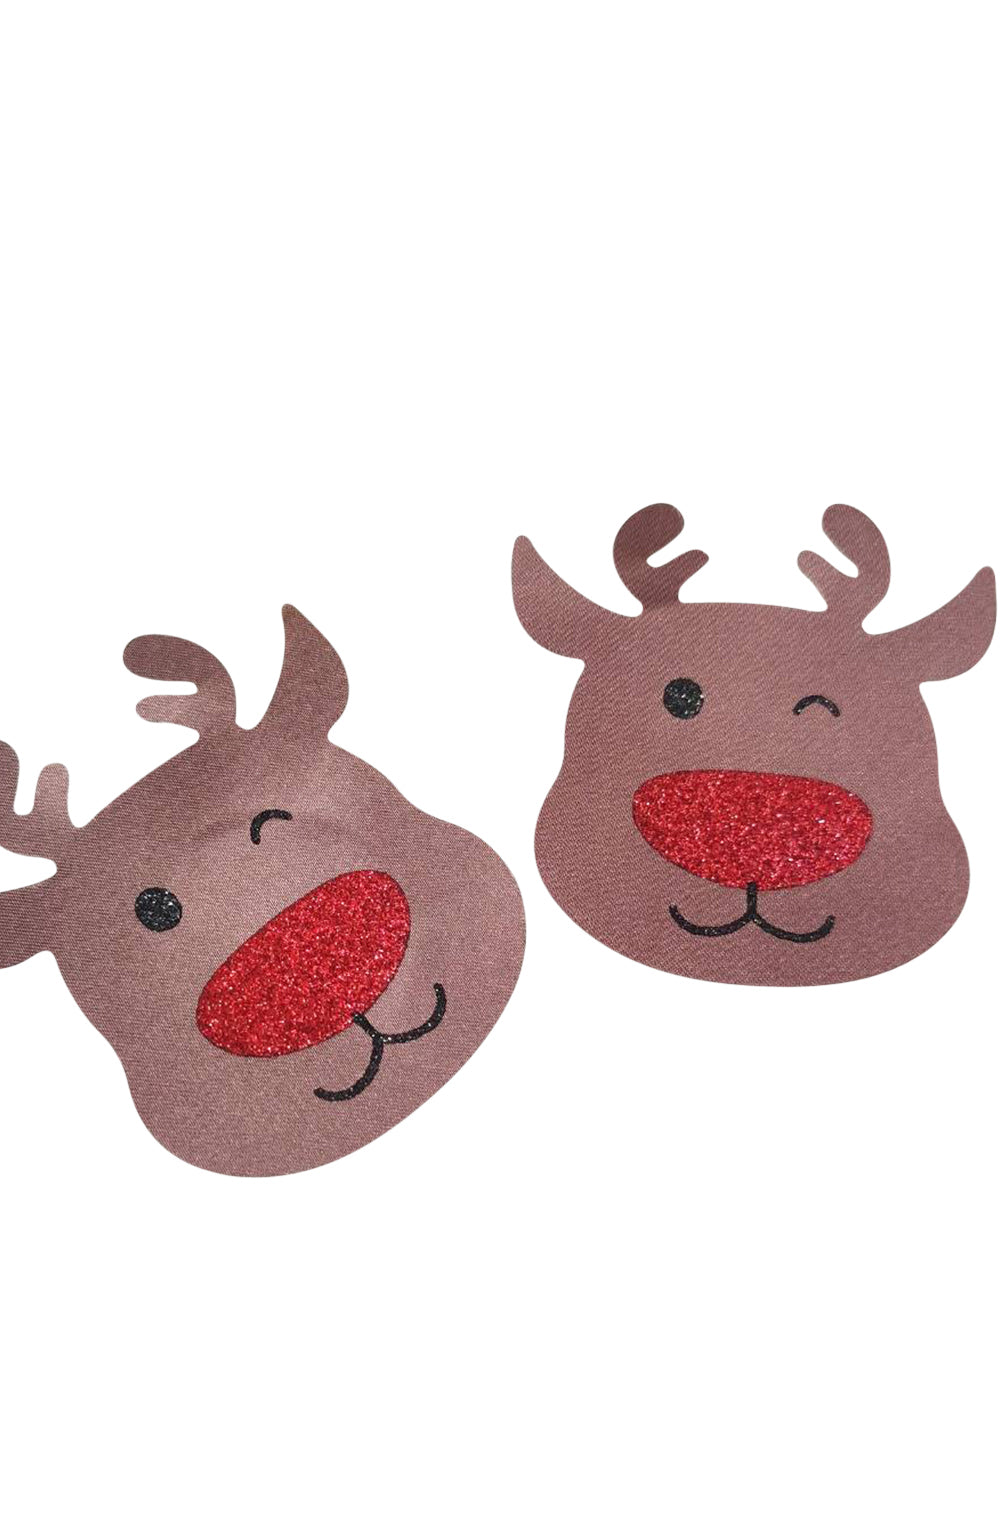 Vibrators, Sex Toy Kits and Sex Toys at Cloud9Adults - YesX YX960 Brown/Red Reindeer Nipple Covers - Buy Sex Toys Online